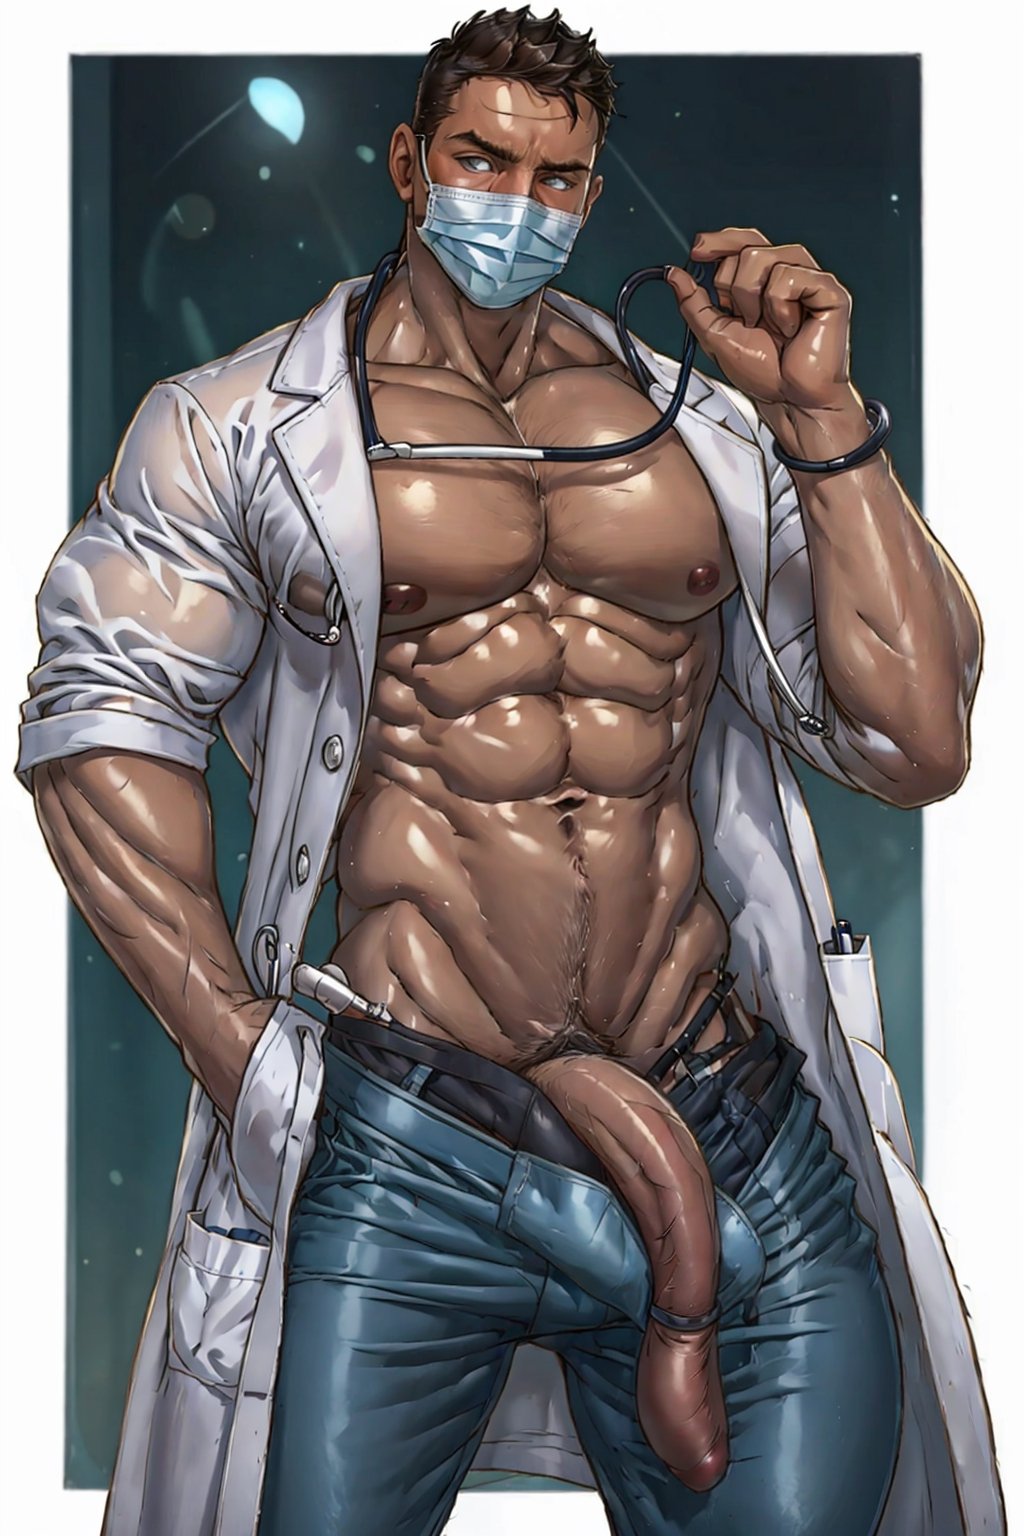 male, gigantic_breast, hairy,sexydoctor, underwear_bulge, pubic_hair, has pants on, no shirt,STETHOSCOPE,COAT/SCRUBS,SURGICAL MASK,SEXYSAILOR